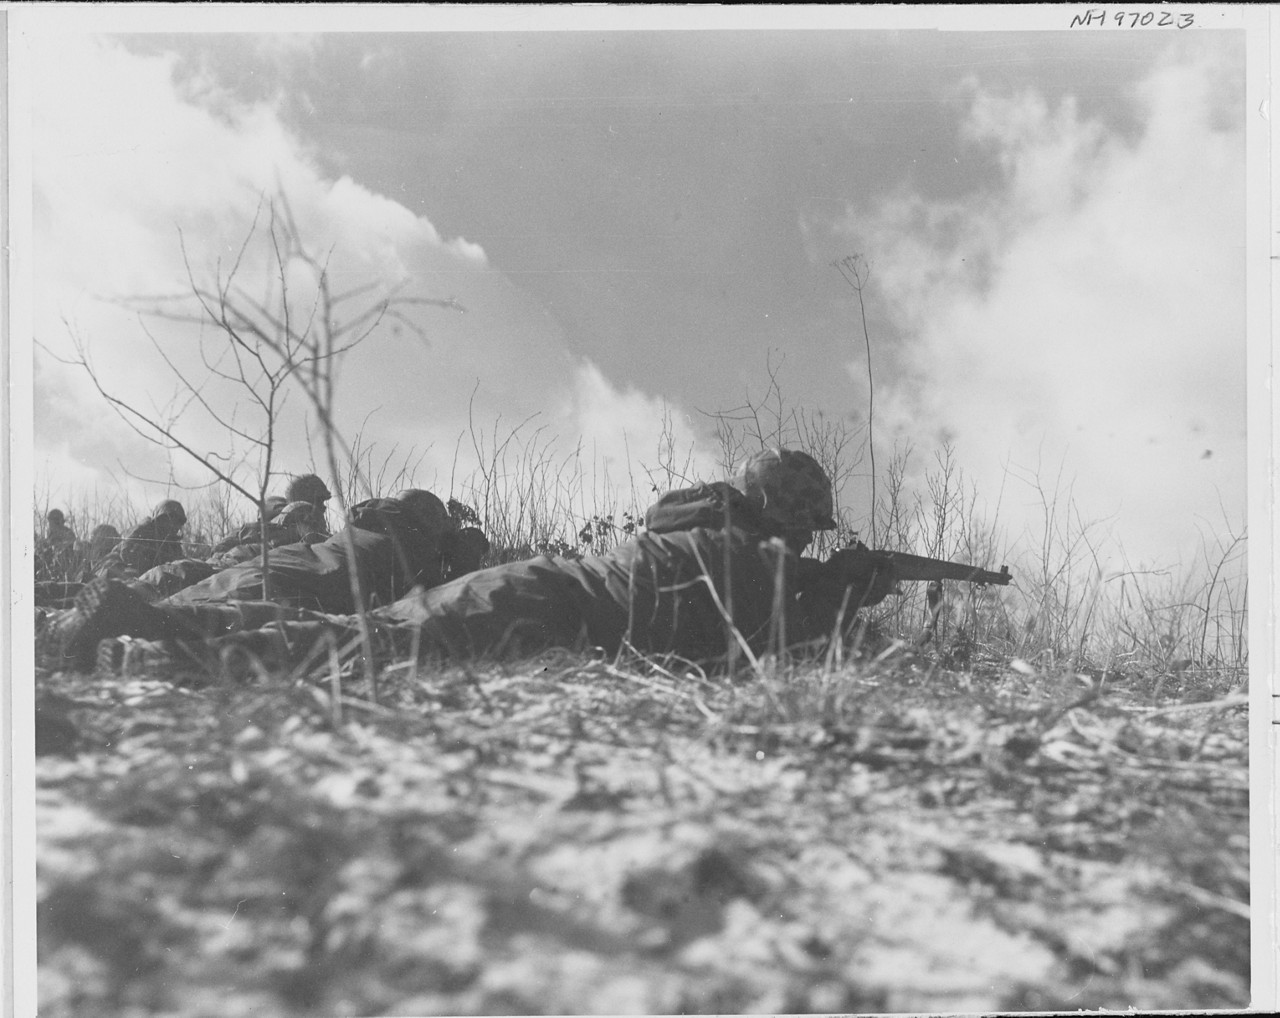 1st Marine Division battling and defeating Chinese infantry divisions in snow.